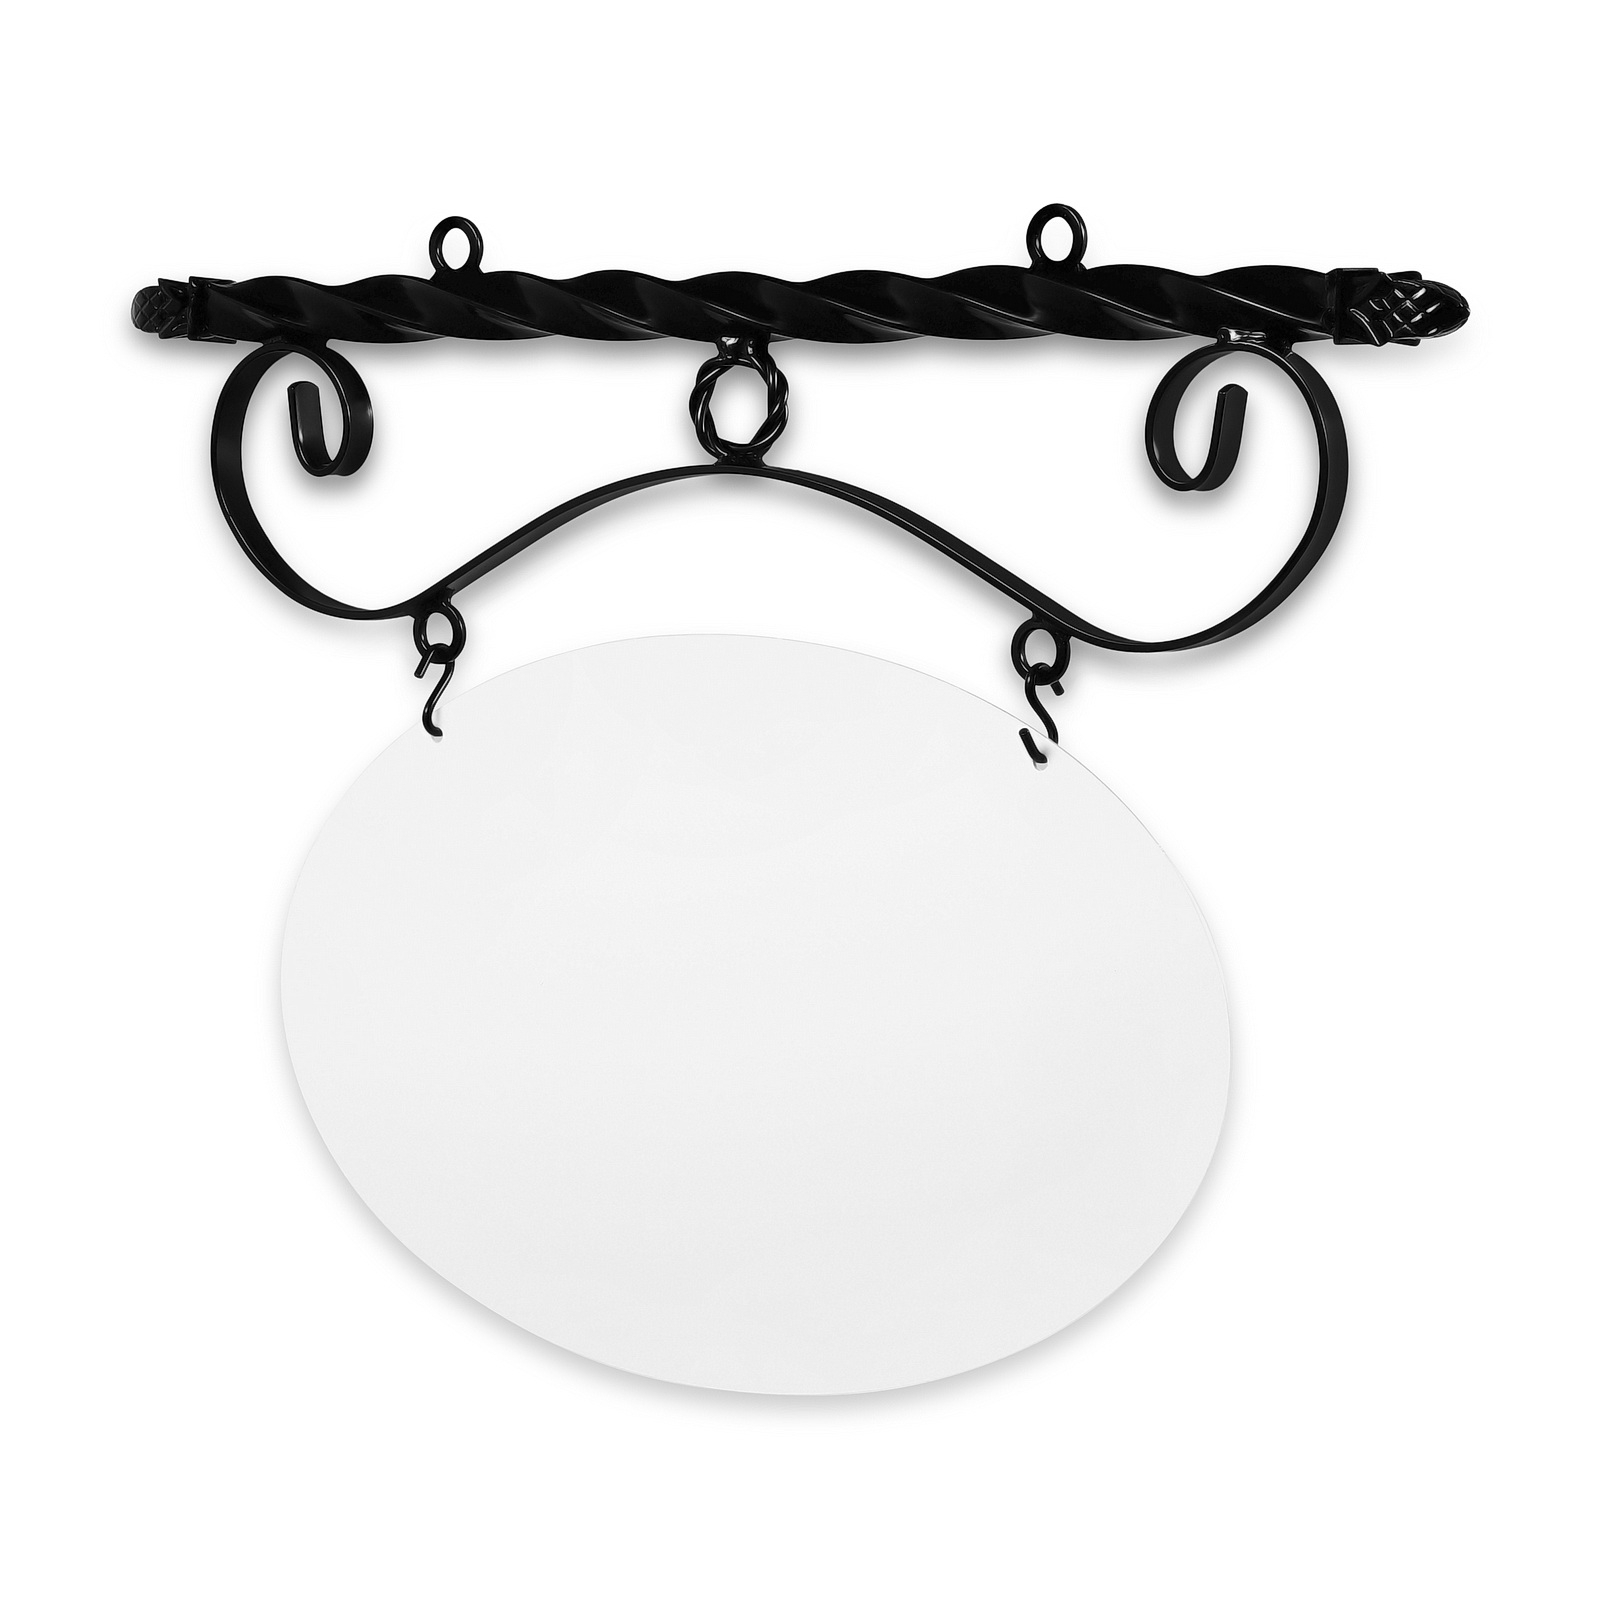 24'' Wide Ceiling Mount Bracket in  Black Powder Coated Steel with 14'' Tall X 22'' Wide X .080'' Thick White Aluminum Sign Blank and 2 Black Powder Coated S-Hooks (Pineapple Finial)